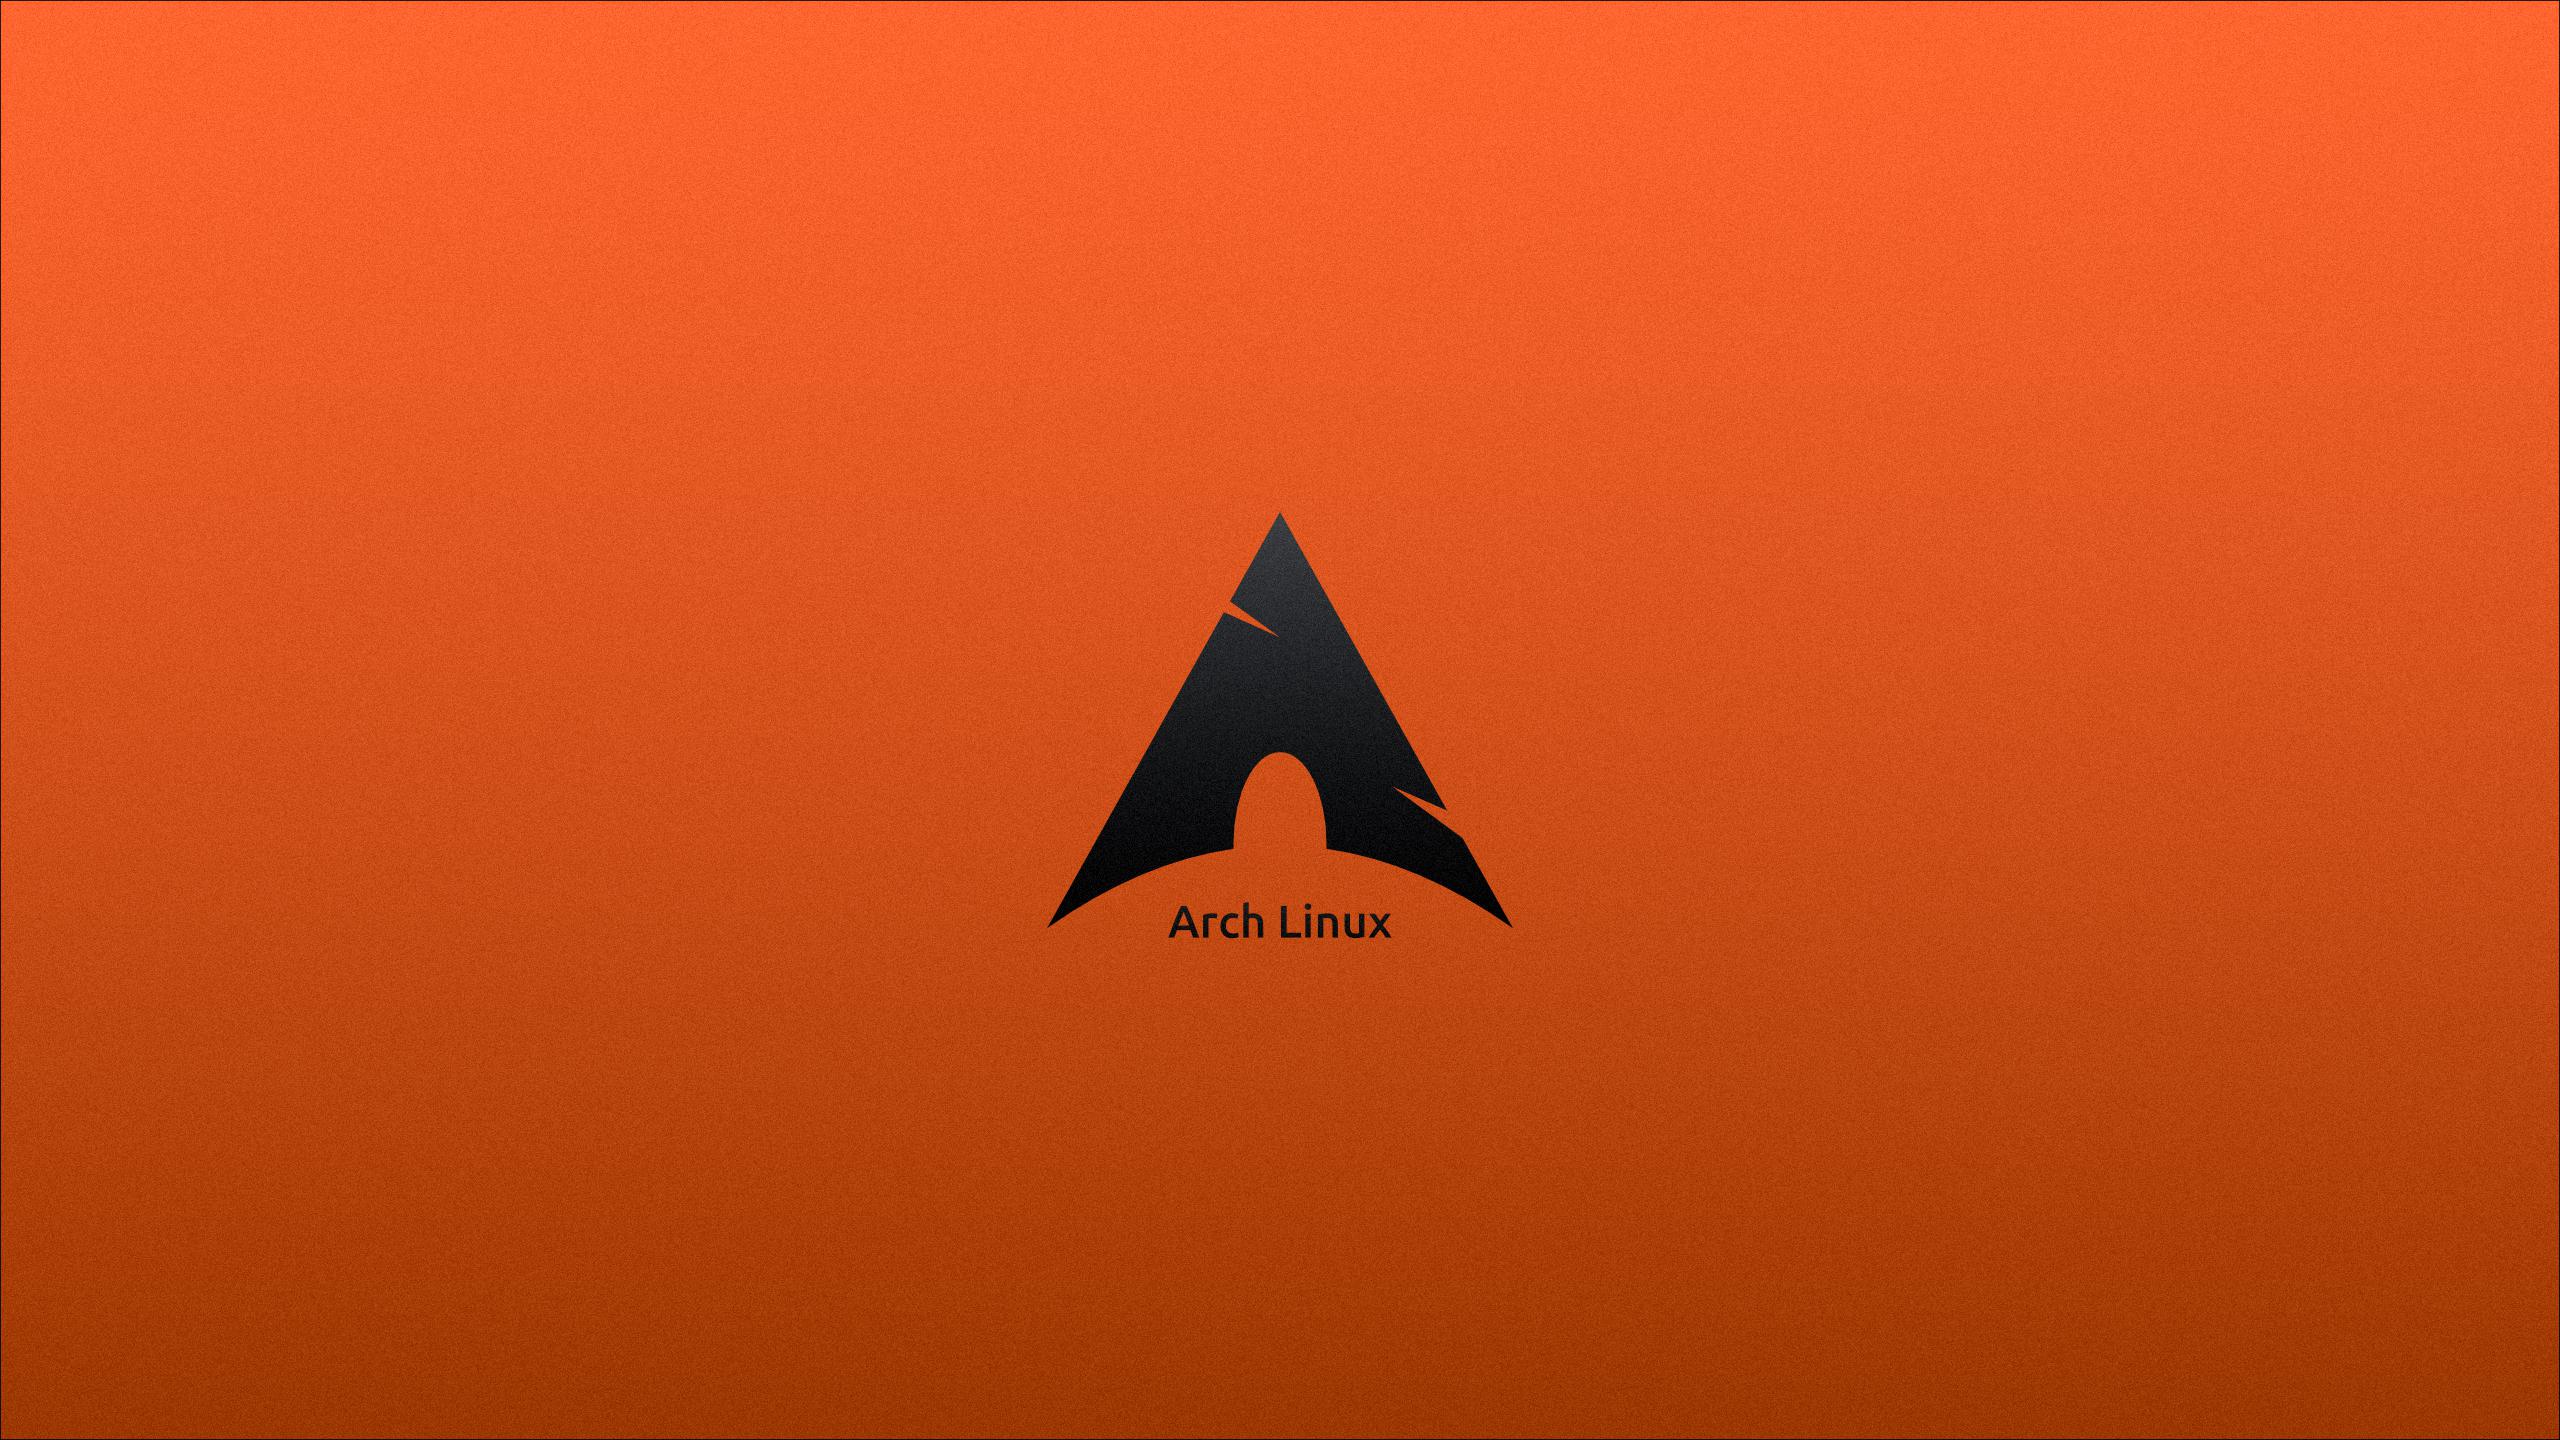  Linux Hintergrundbild 2560x1440. Linux 4K wallpaper for your desktop or mobile screen free and easy to download